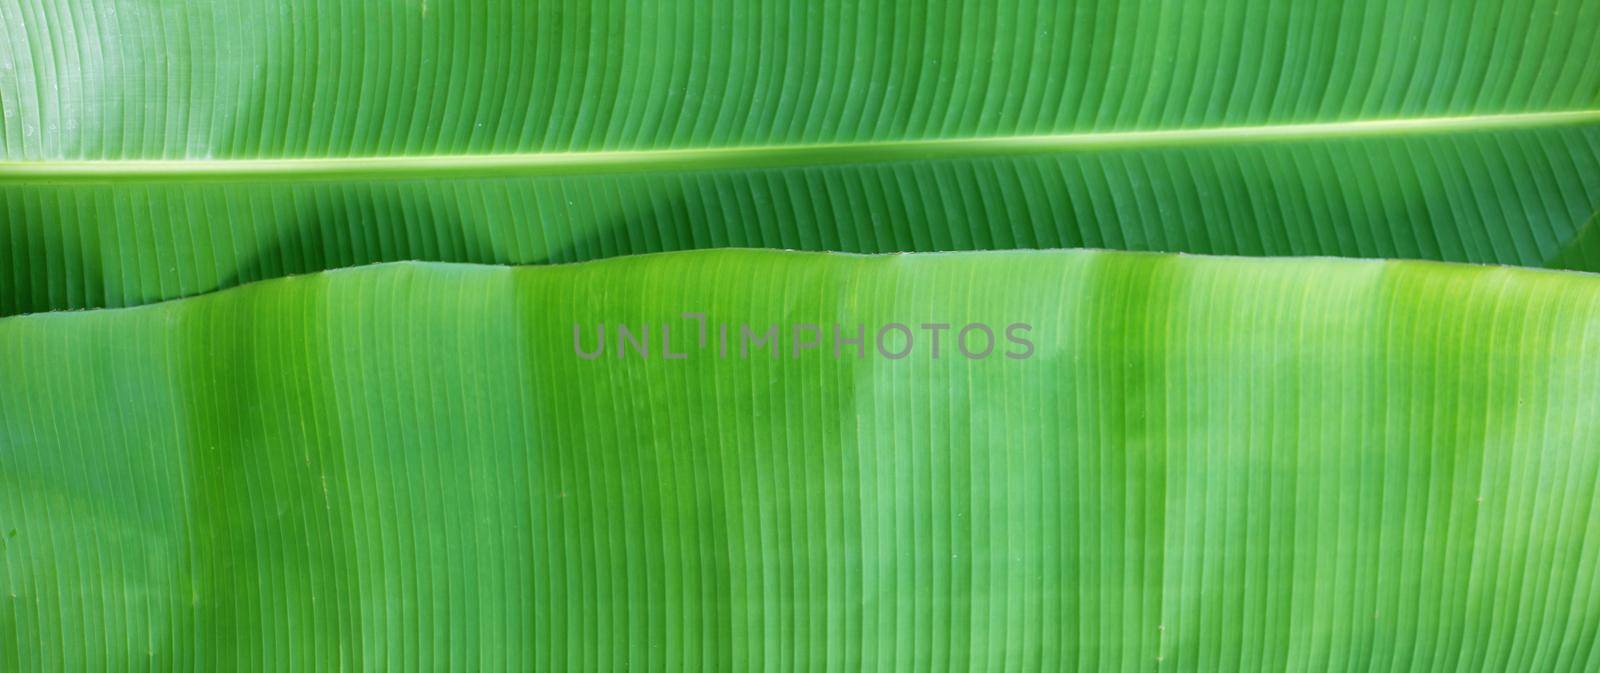 Banana leaves texure for background.